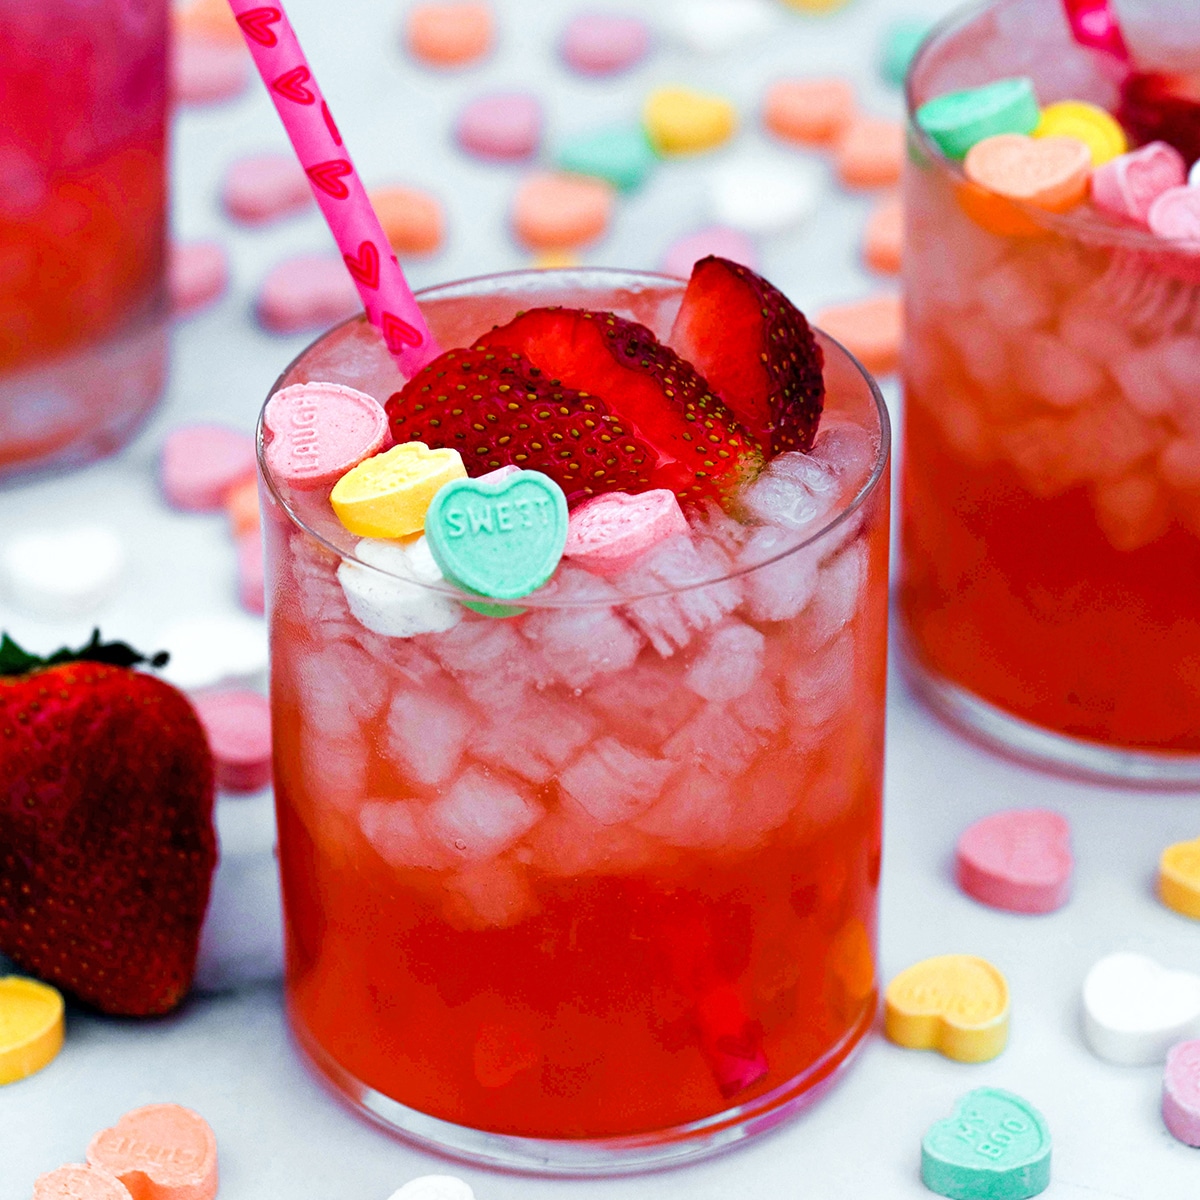 Looking for a love potion this Valentine's Day? Just add strawberry vanilla simple syrup, vodka, and lime juice for this Strawberry Vanilla Love Potion Cocktail! Top it with conversation hearts for February 14 or enjoy it with a loved one any day of the year.